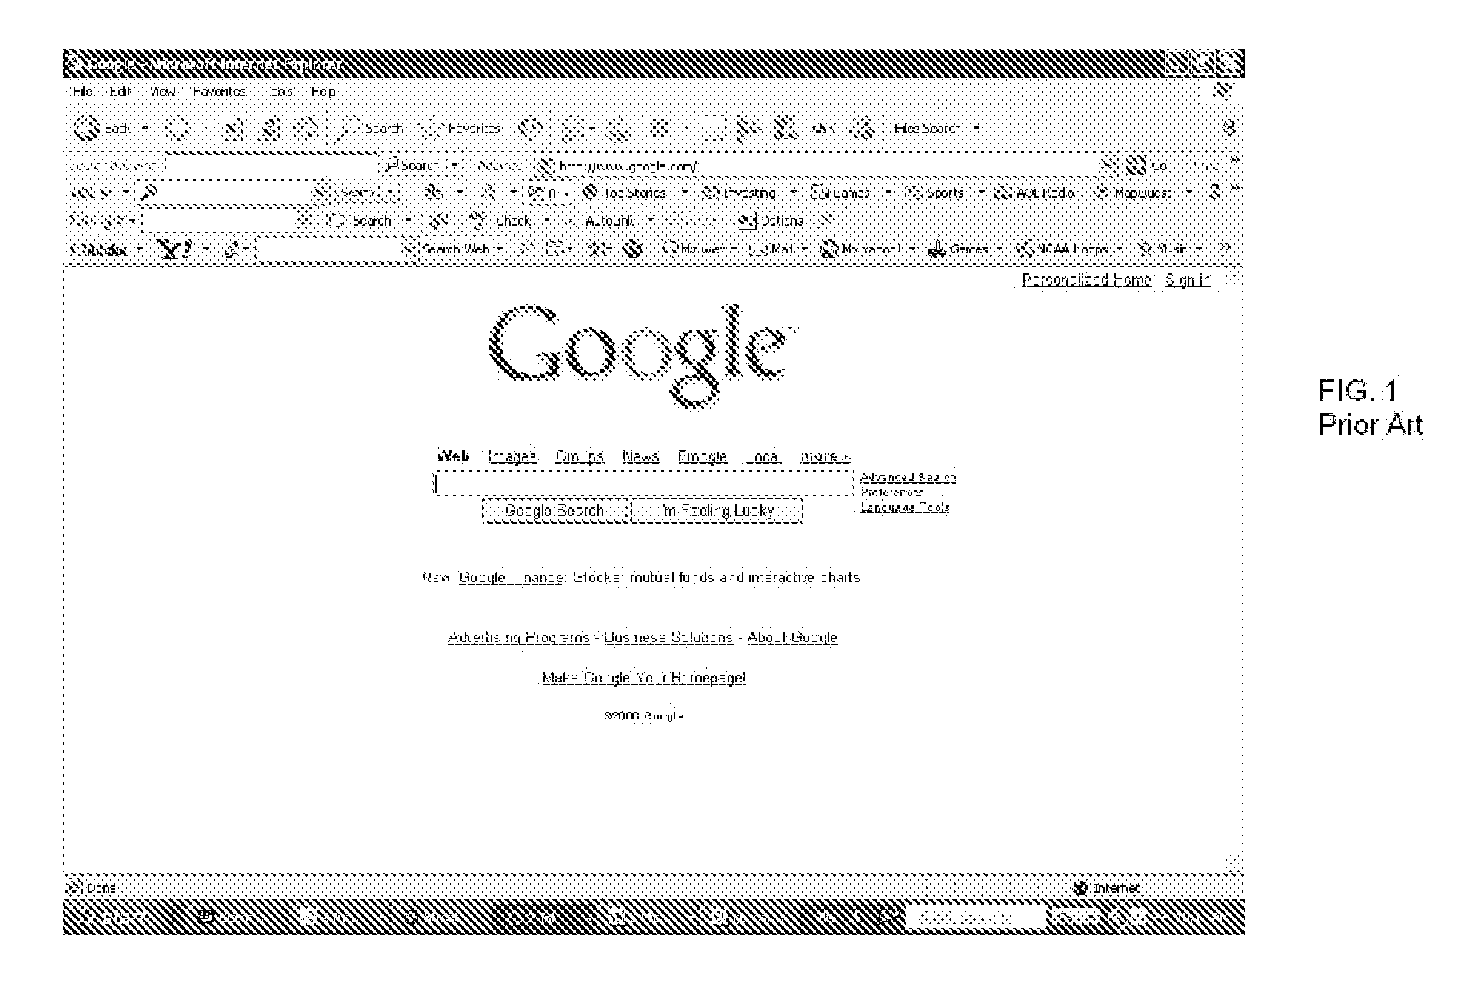 Method and system for enhanced web searching